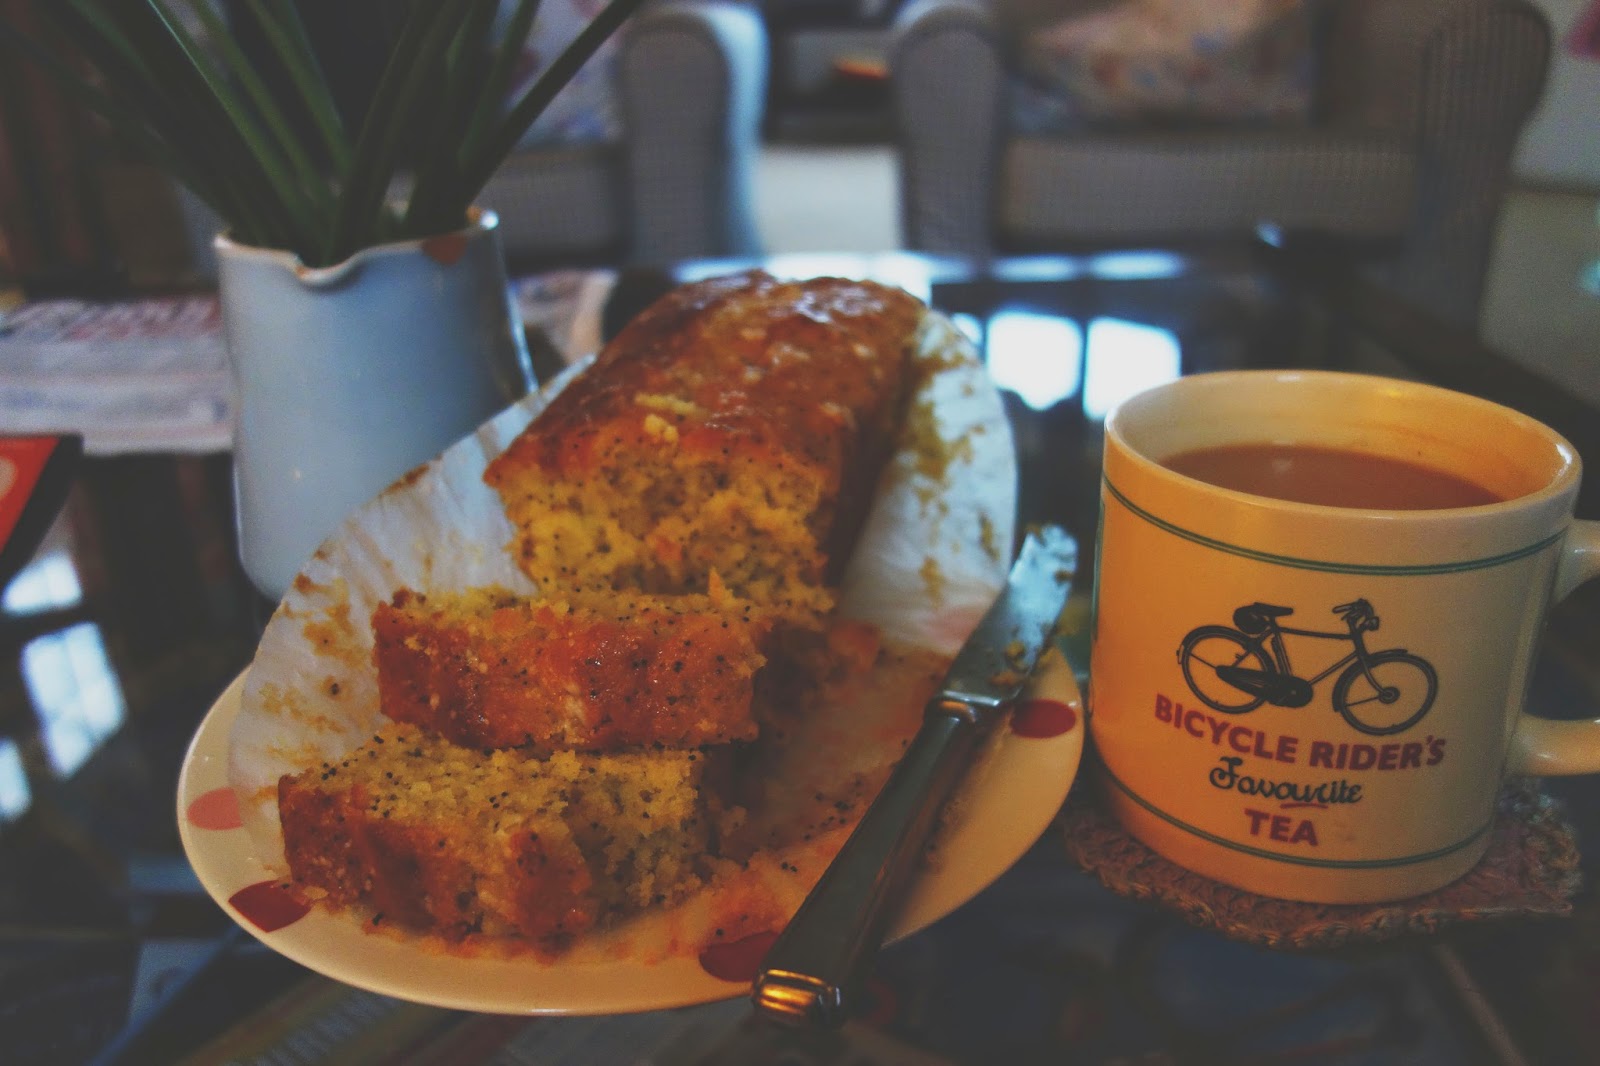 Cup of tea and cake